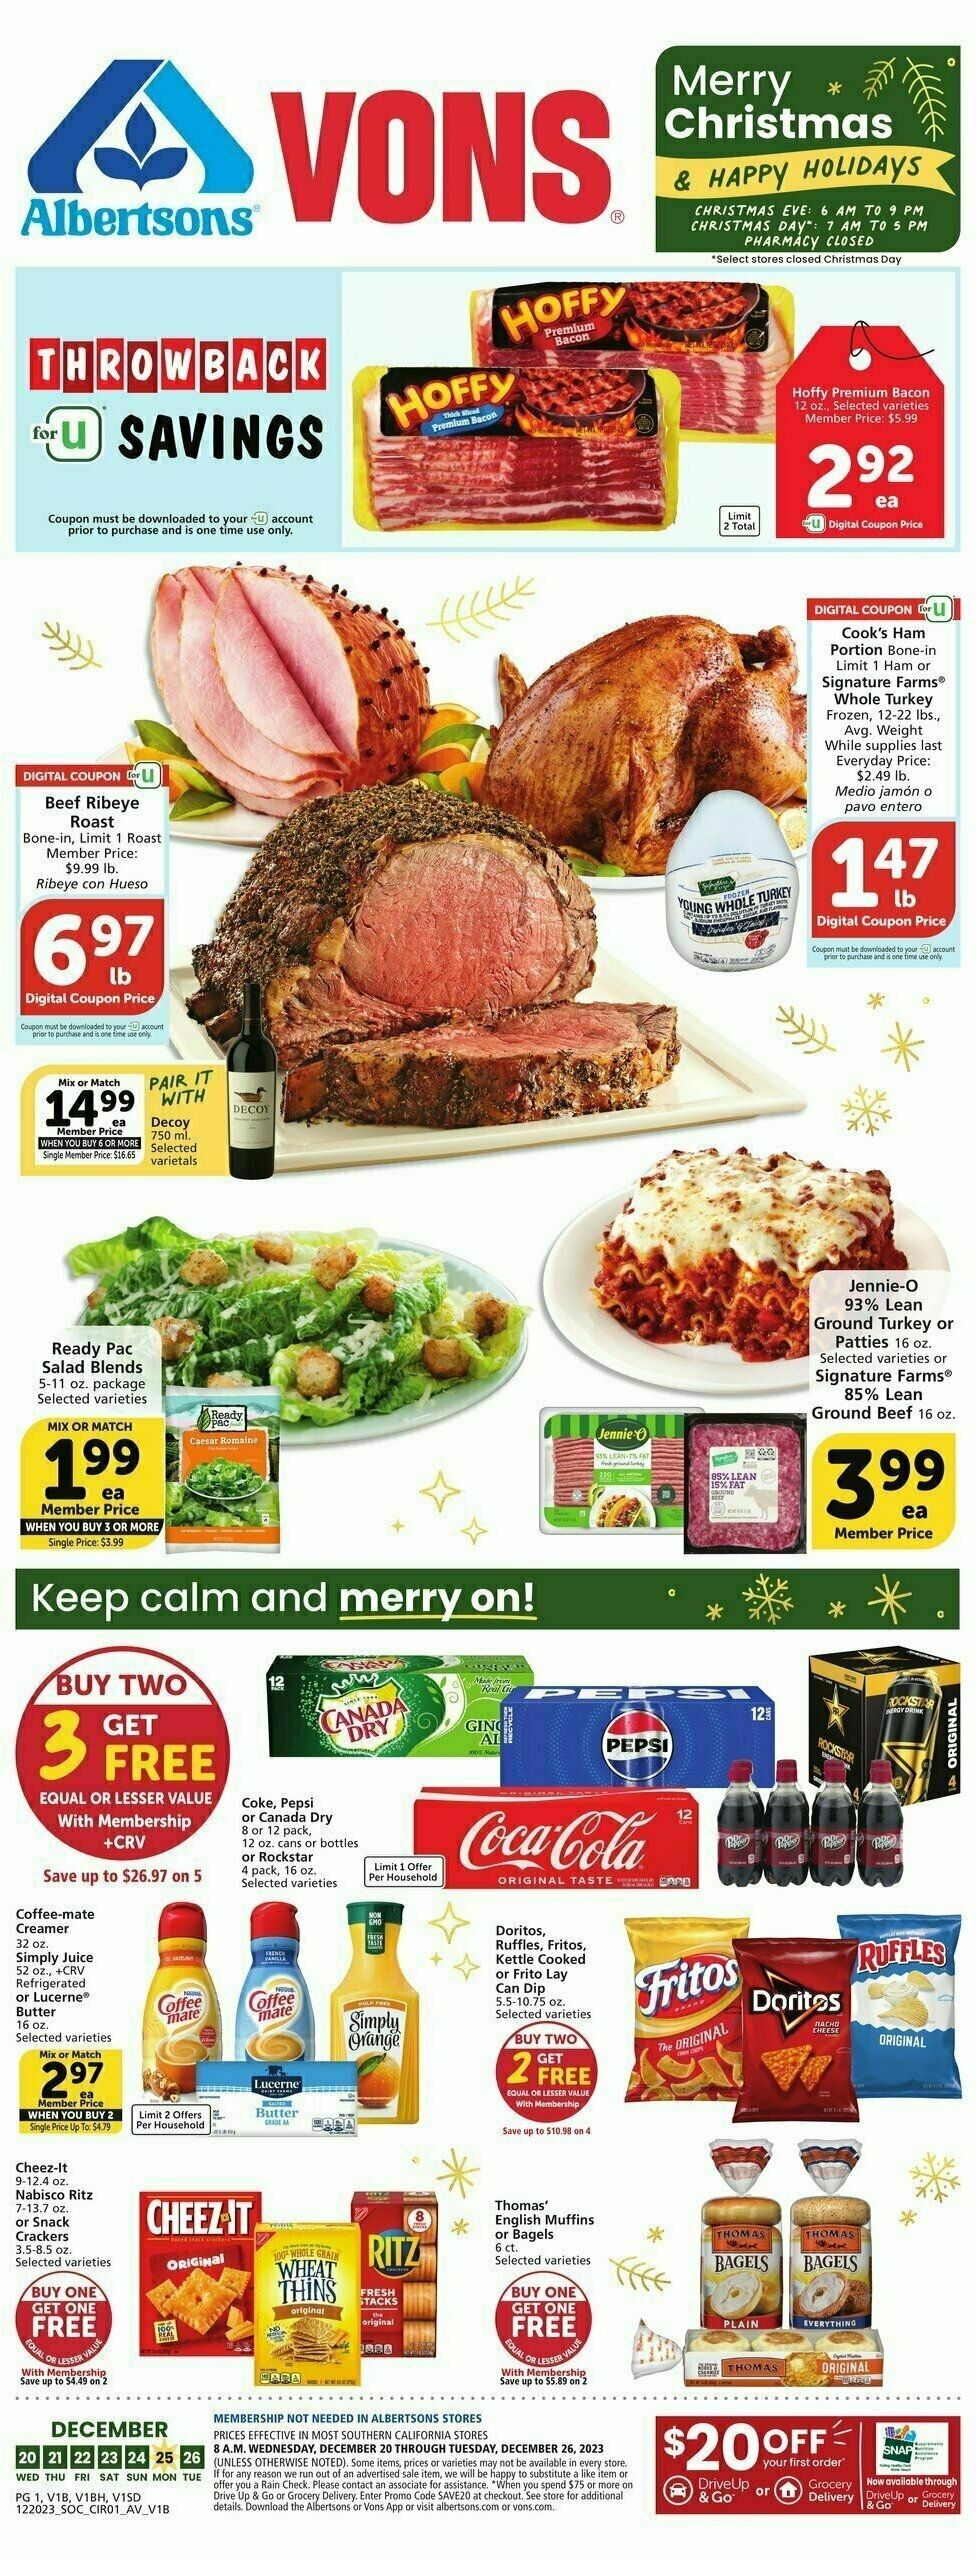 Vons Weekly Ad from December 20